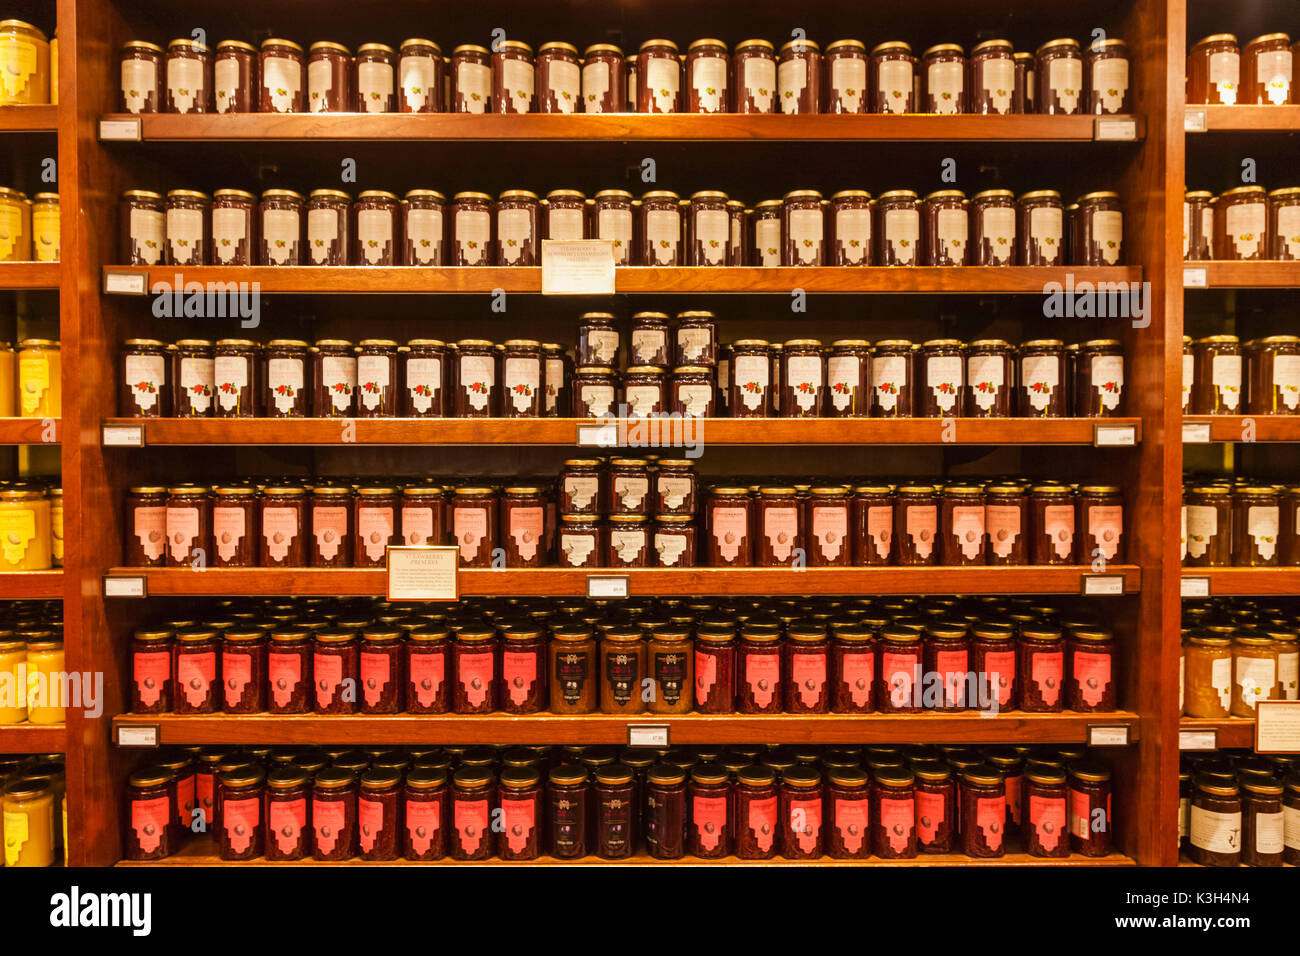 England, London, Piccadilly, 'Fortnum and Mason' Store, Display of Jams and Preserves Stock Photo